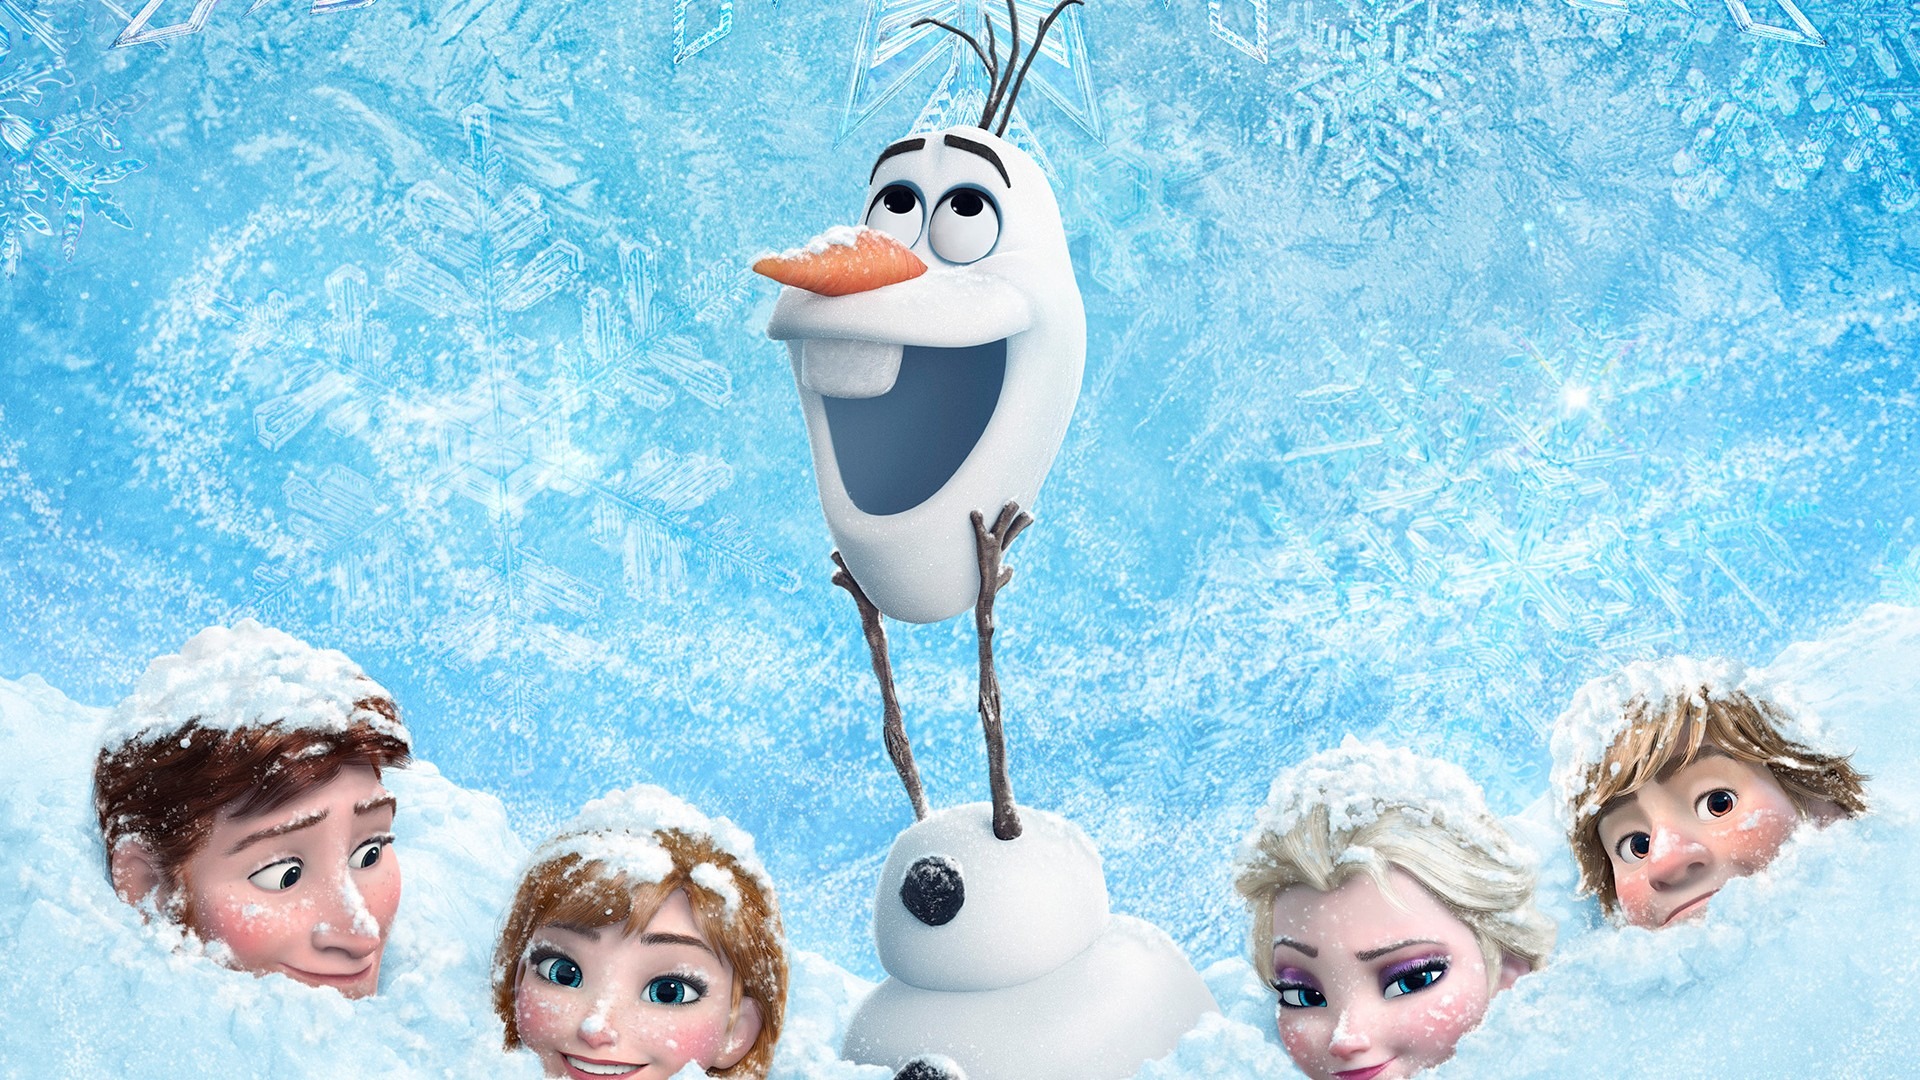 You Can Frozen Disney Movie Wallpaper In Your Puter By